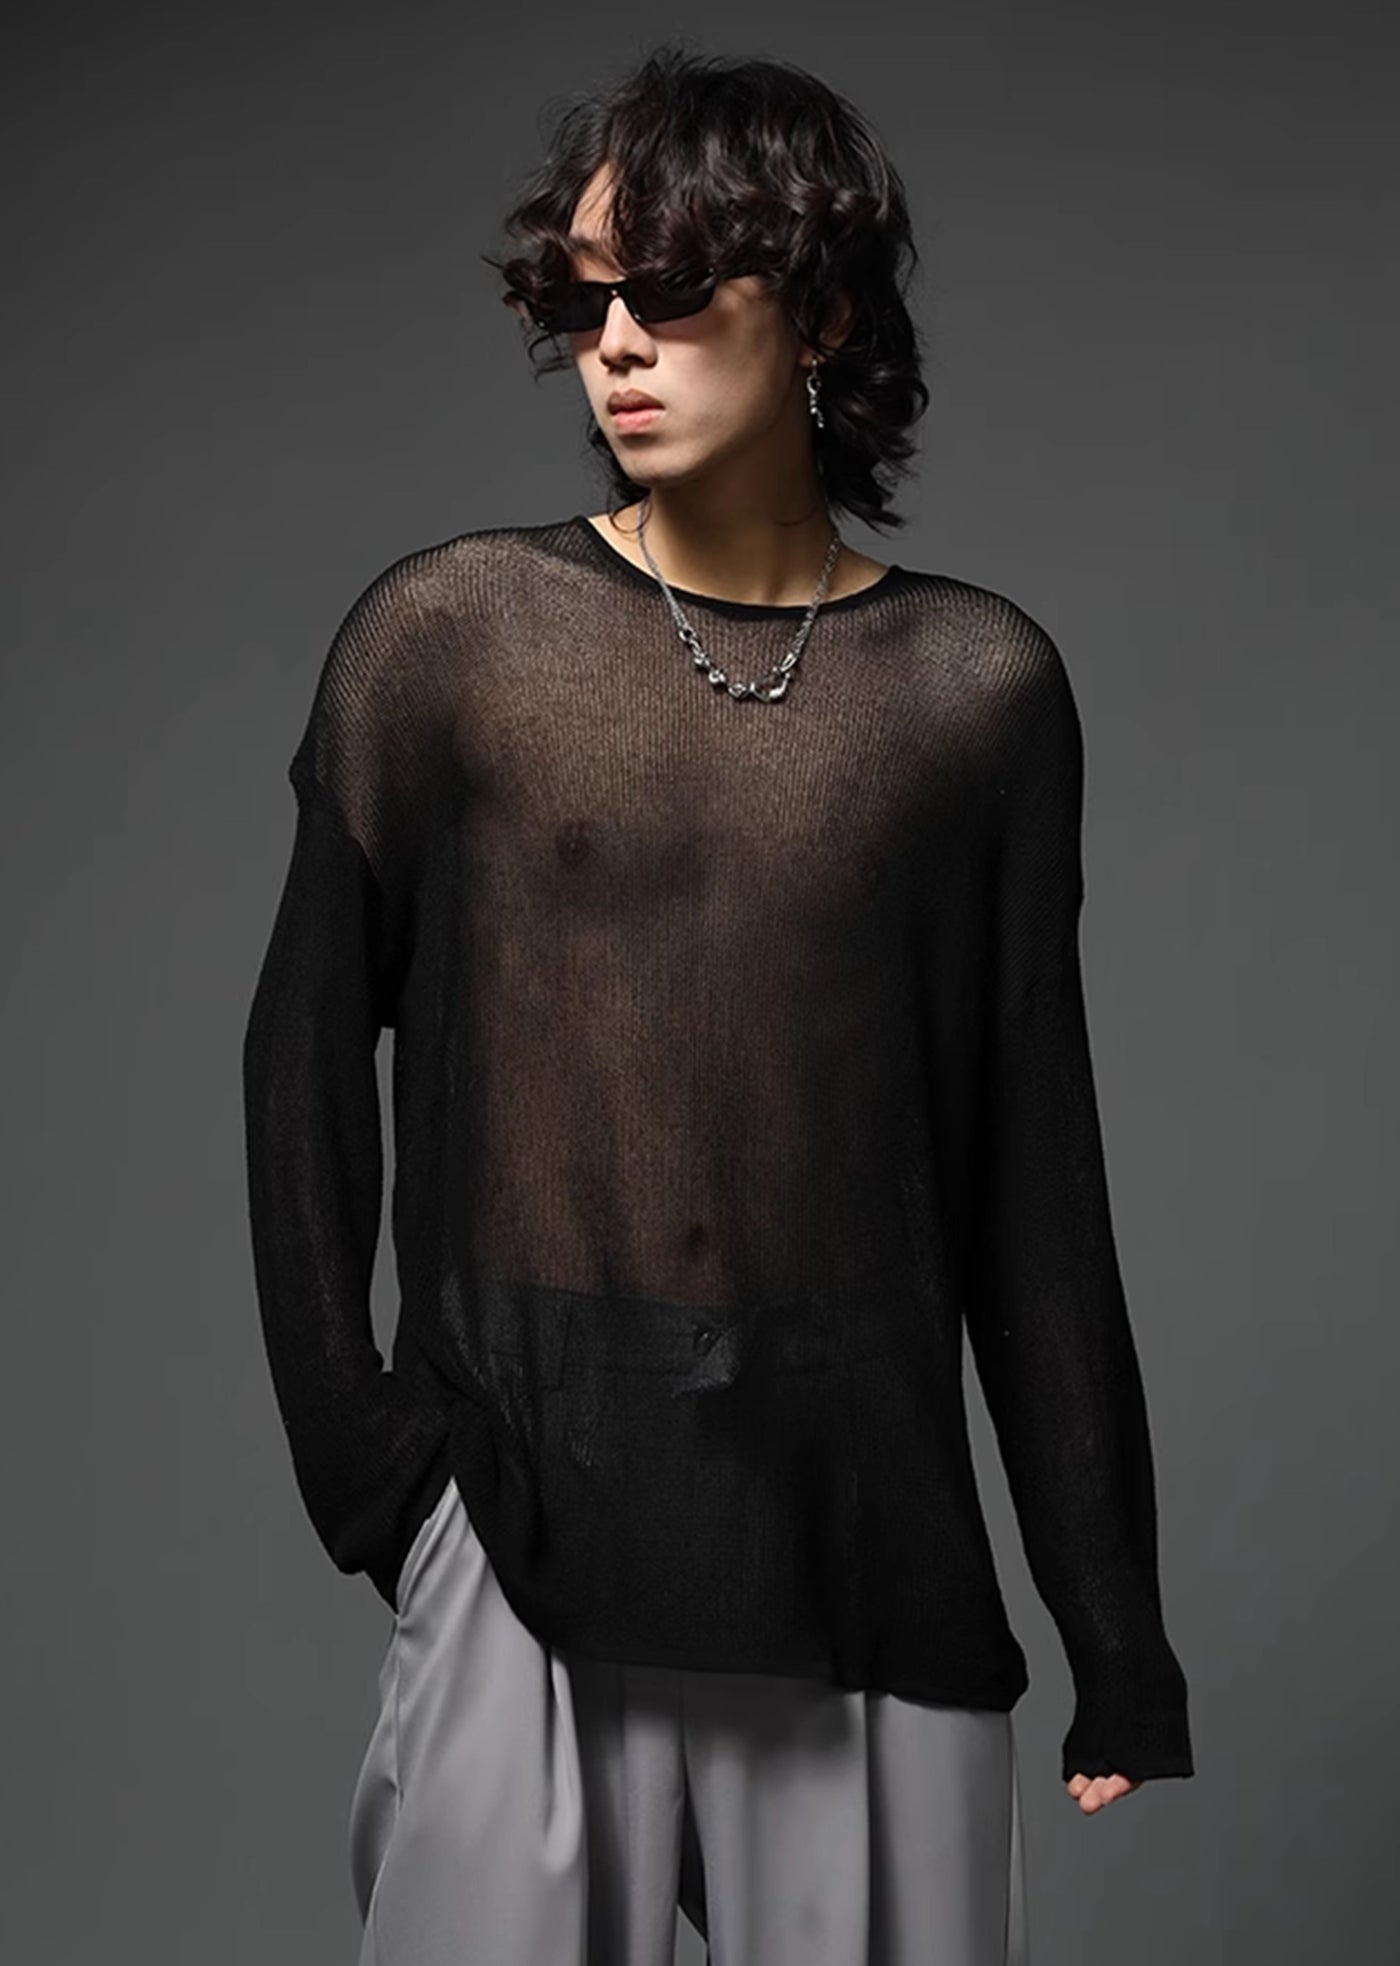 【Future Boy】Translucent sexy wide neck silhouette long sleeve T-shirt  FB0003